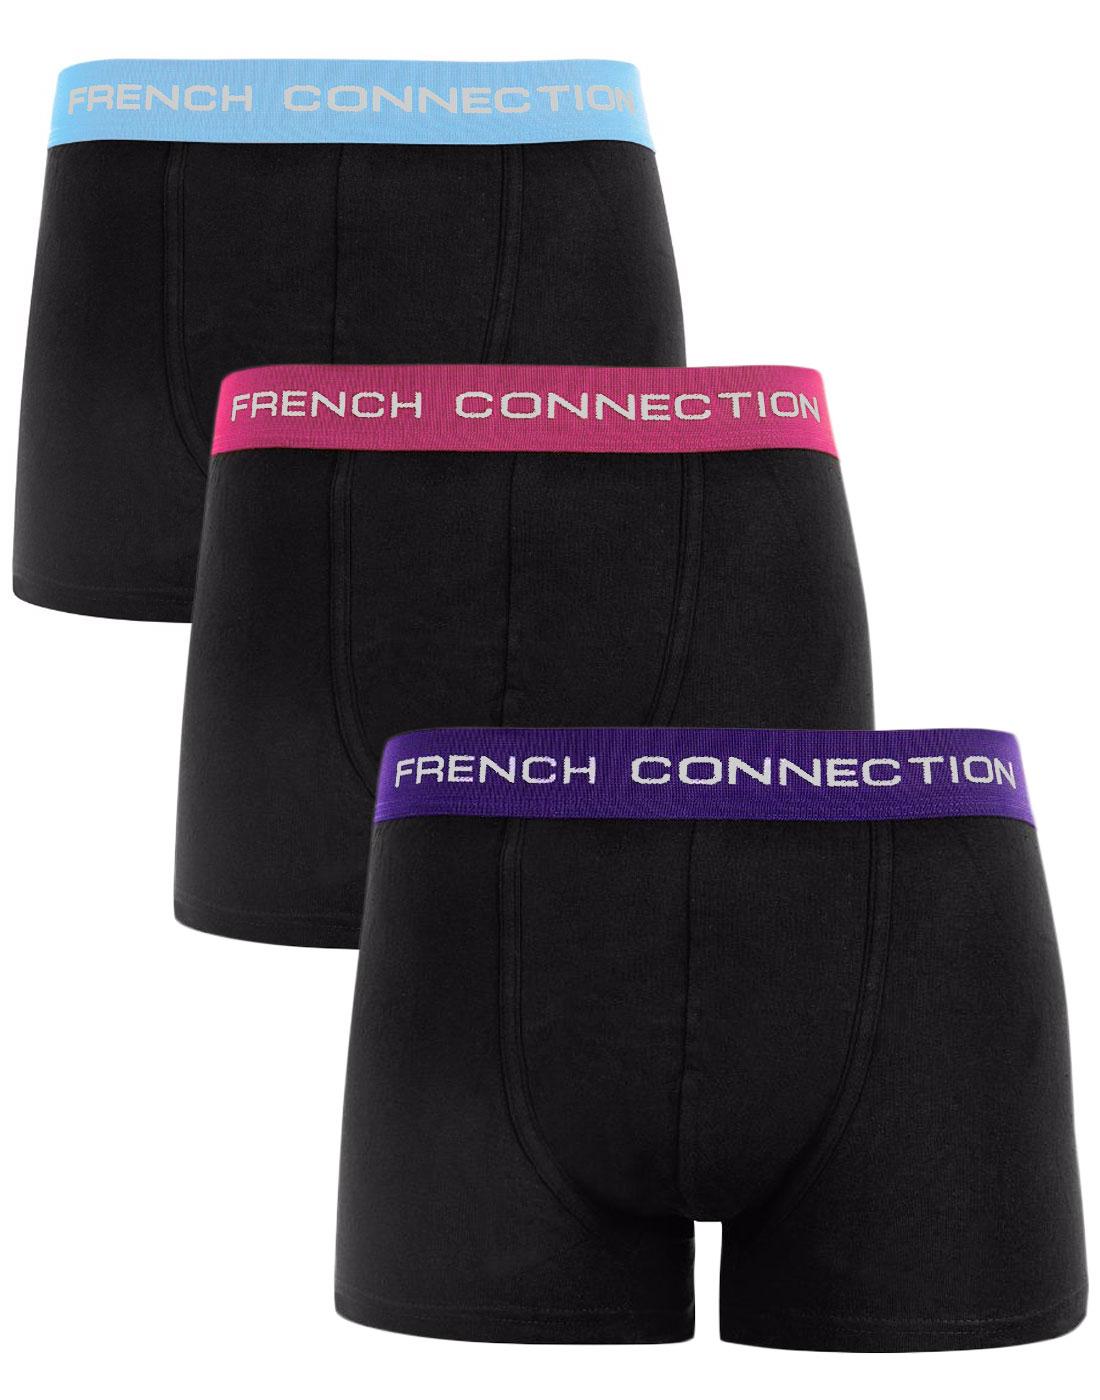 + FRENCH CONNECTION 3 Pack Boxer Shorts BLACK